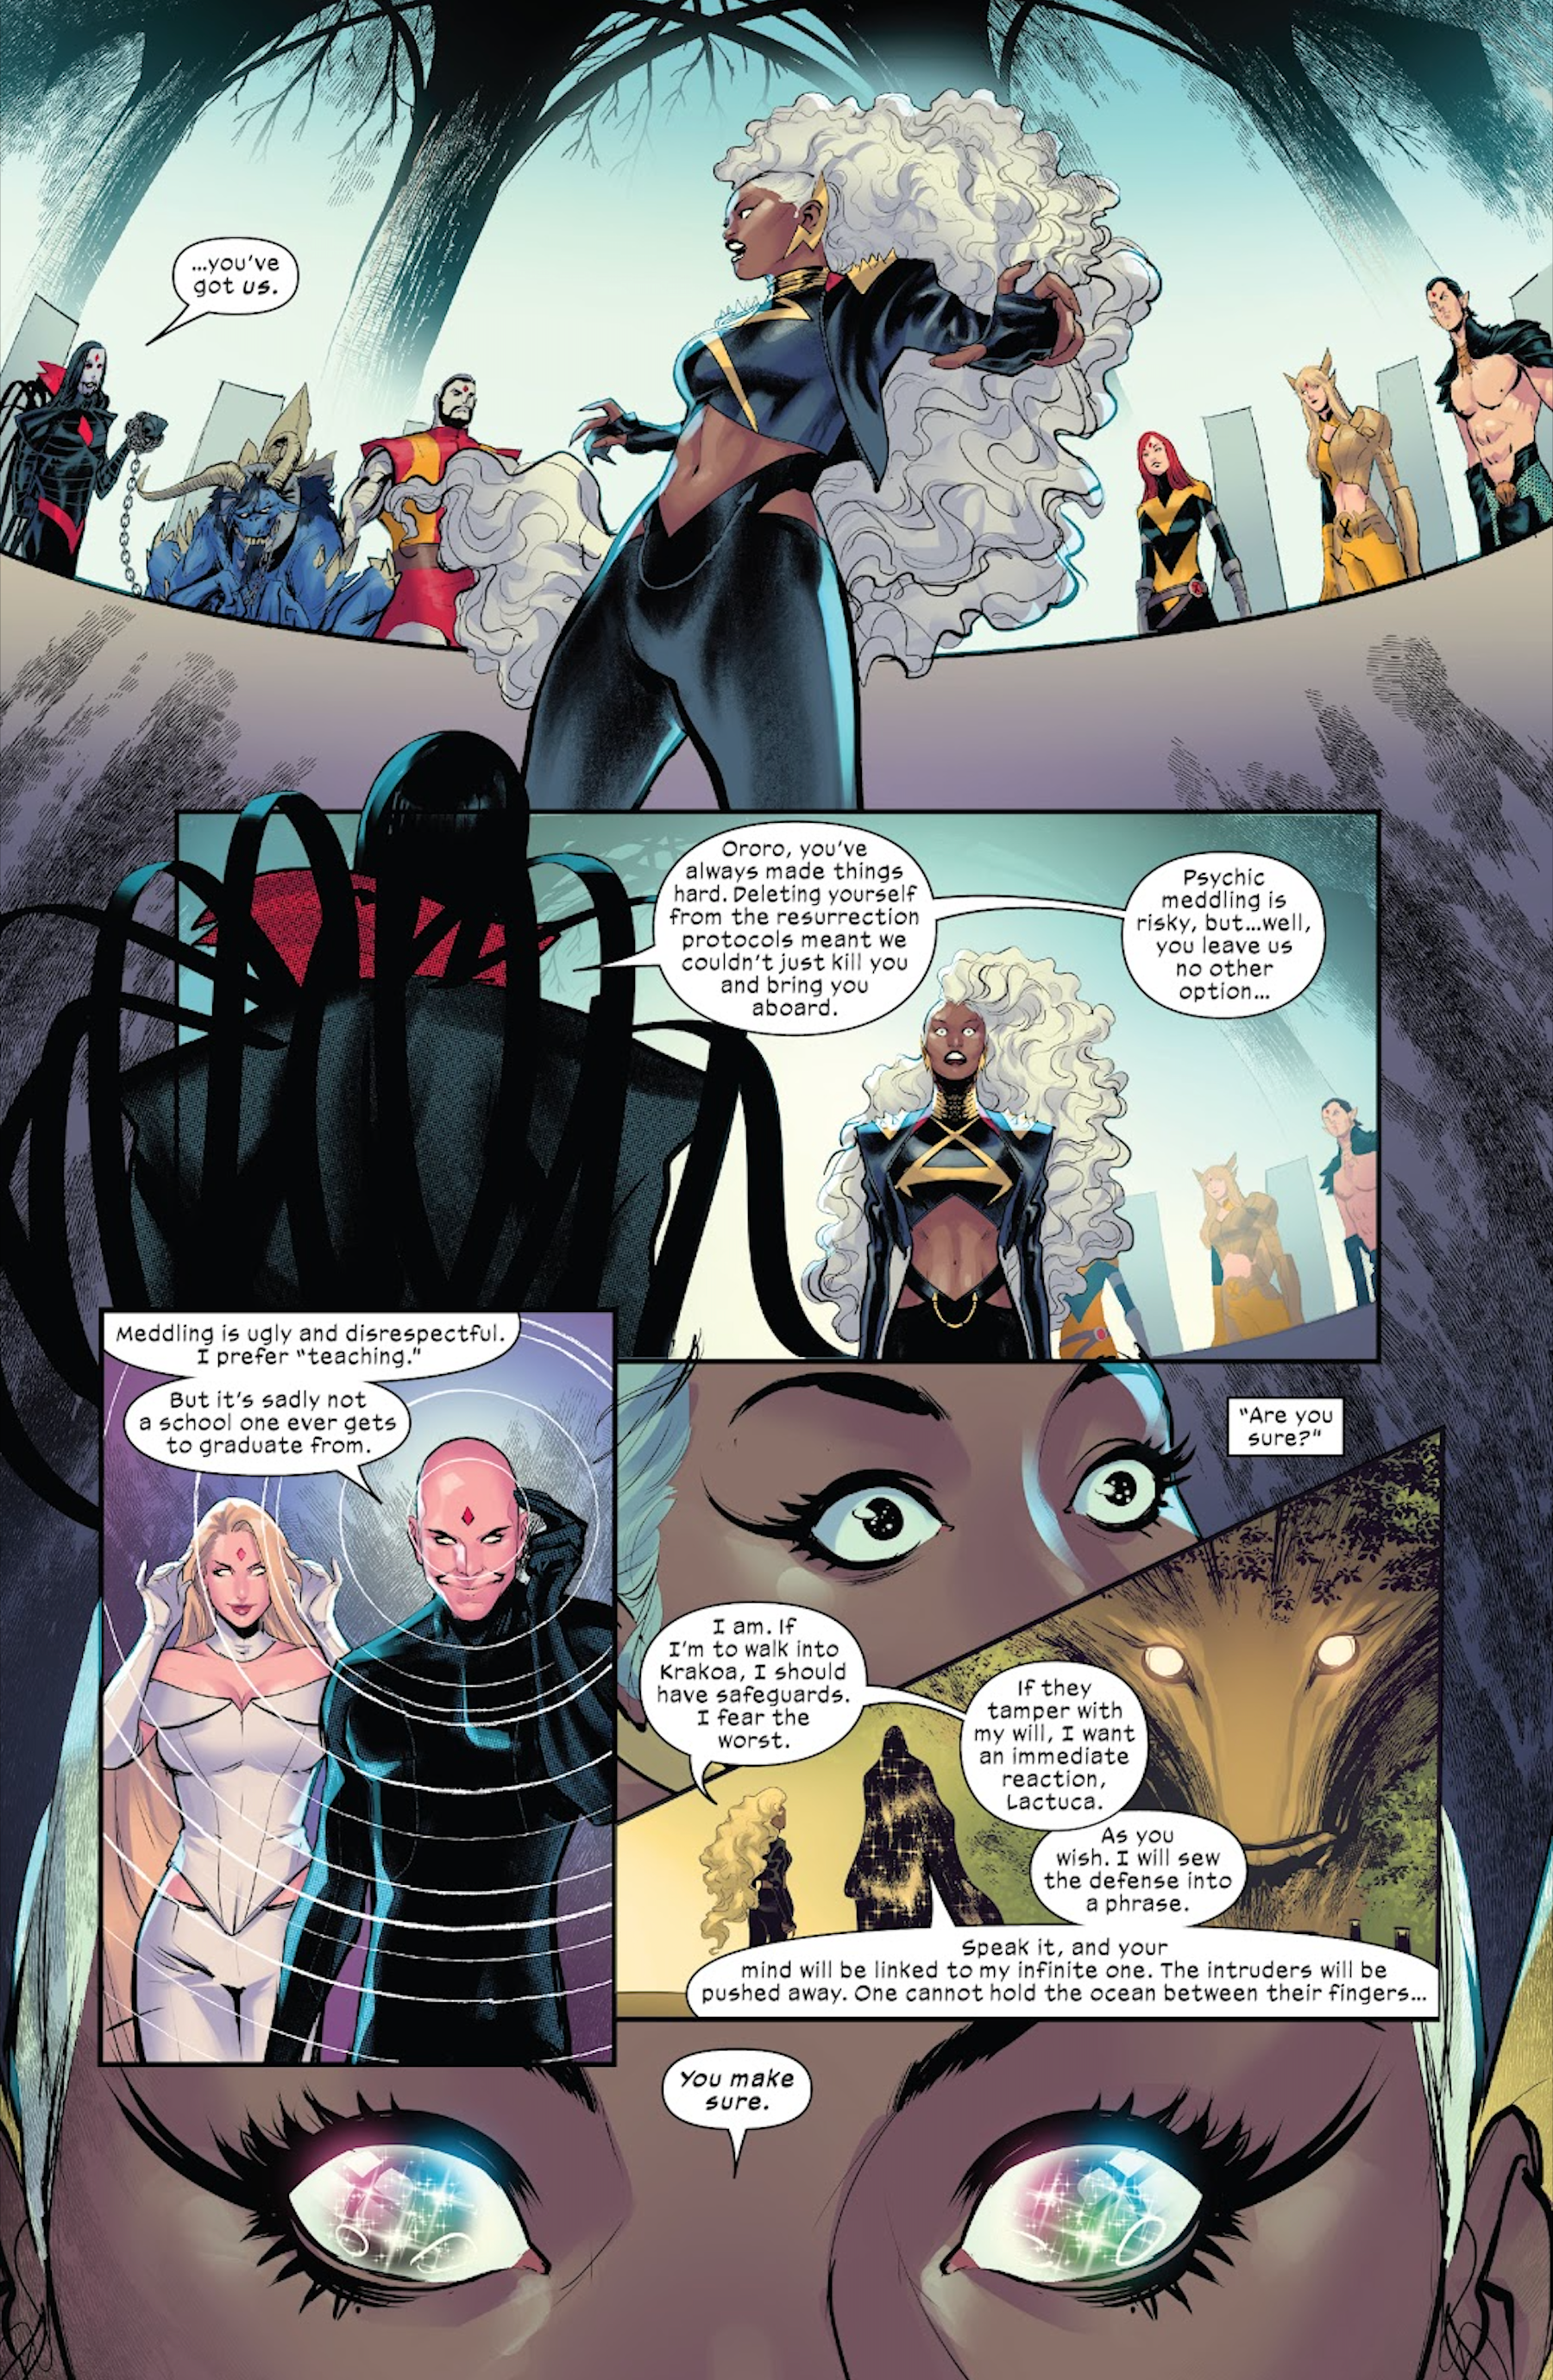 Storm is attacked by Sinister and his X-Men